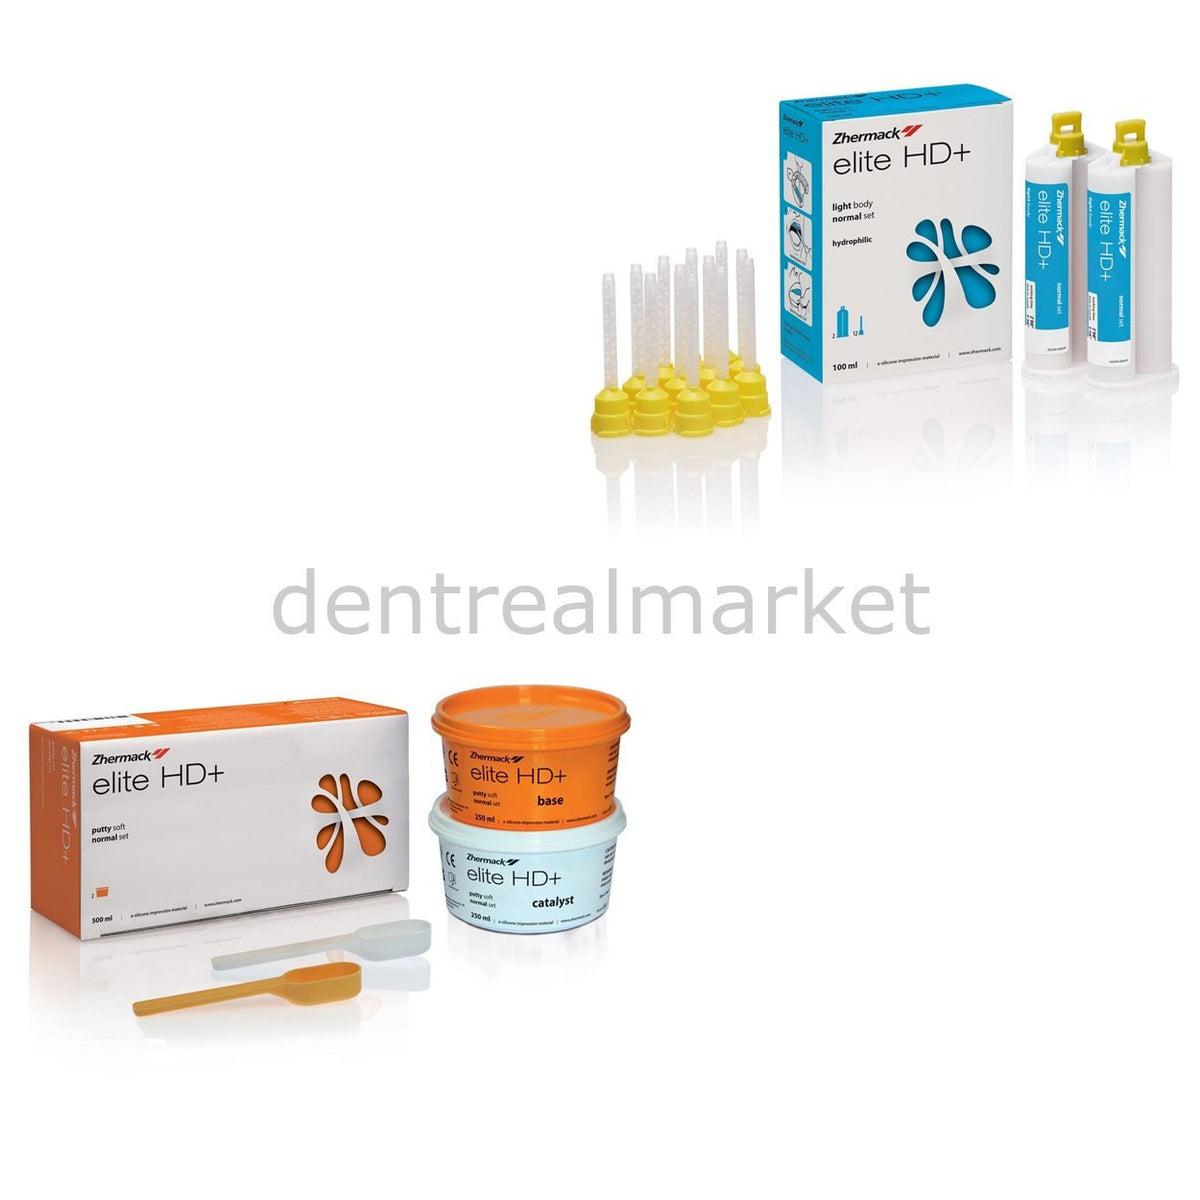 DentrealStore - Zhermack Elite HD+ Putty Soft & Light Body Normal Set - Impression Tray Material